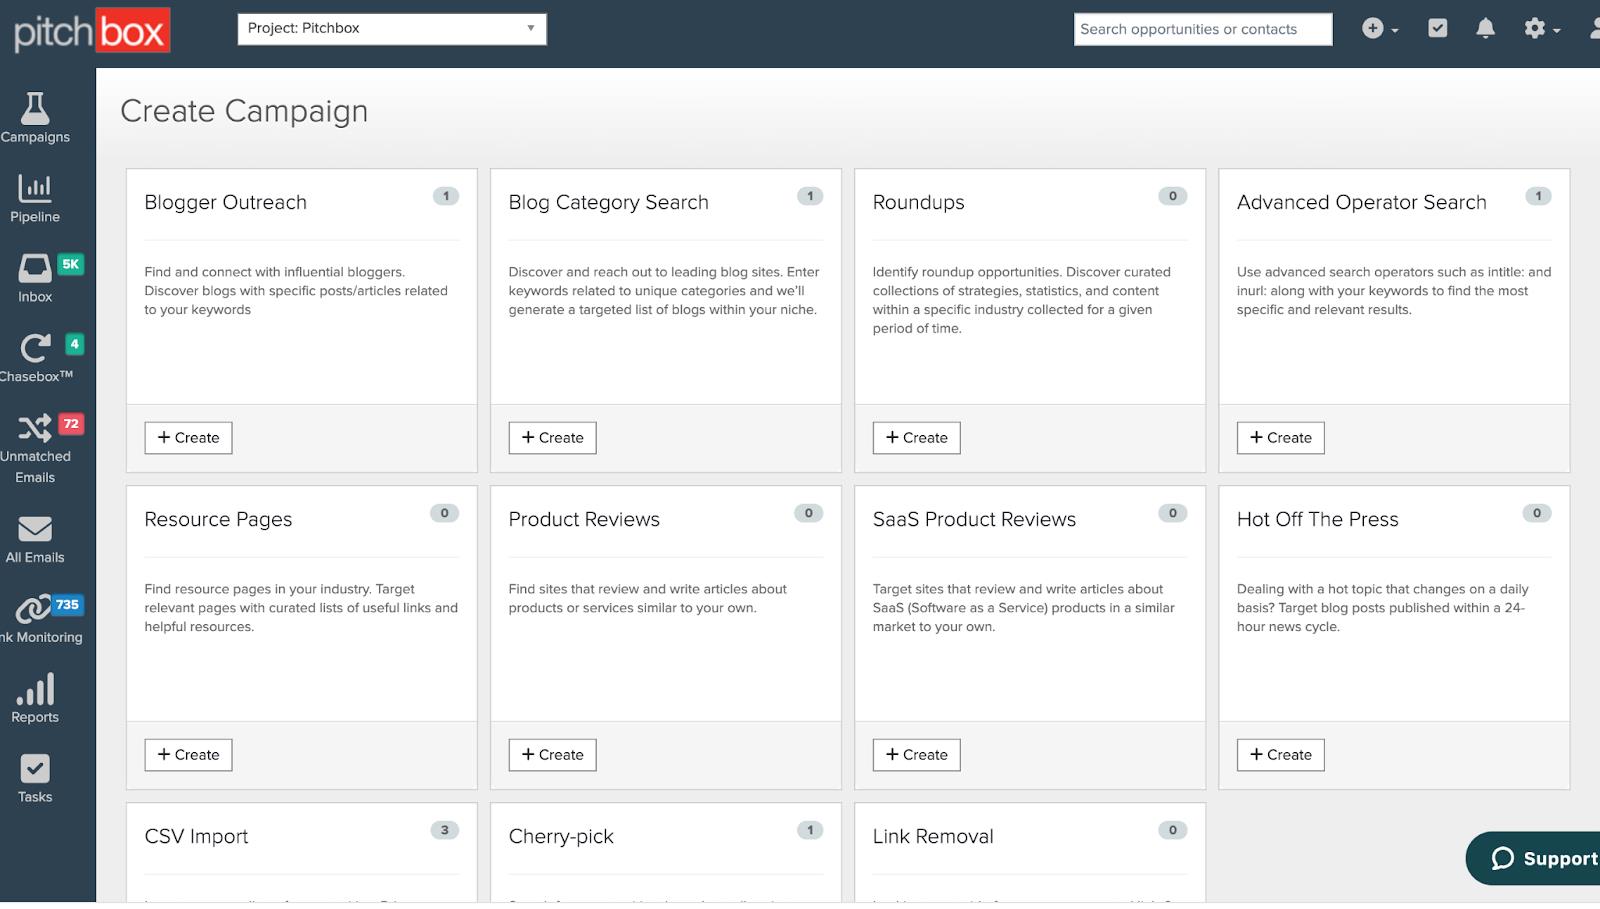 Relevant resource pages by Pitchbox